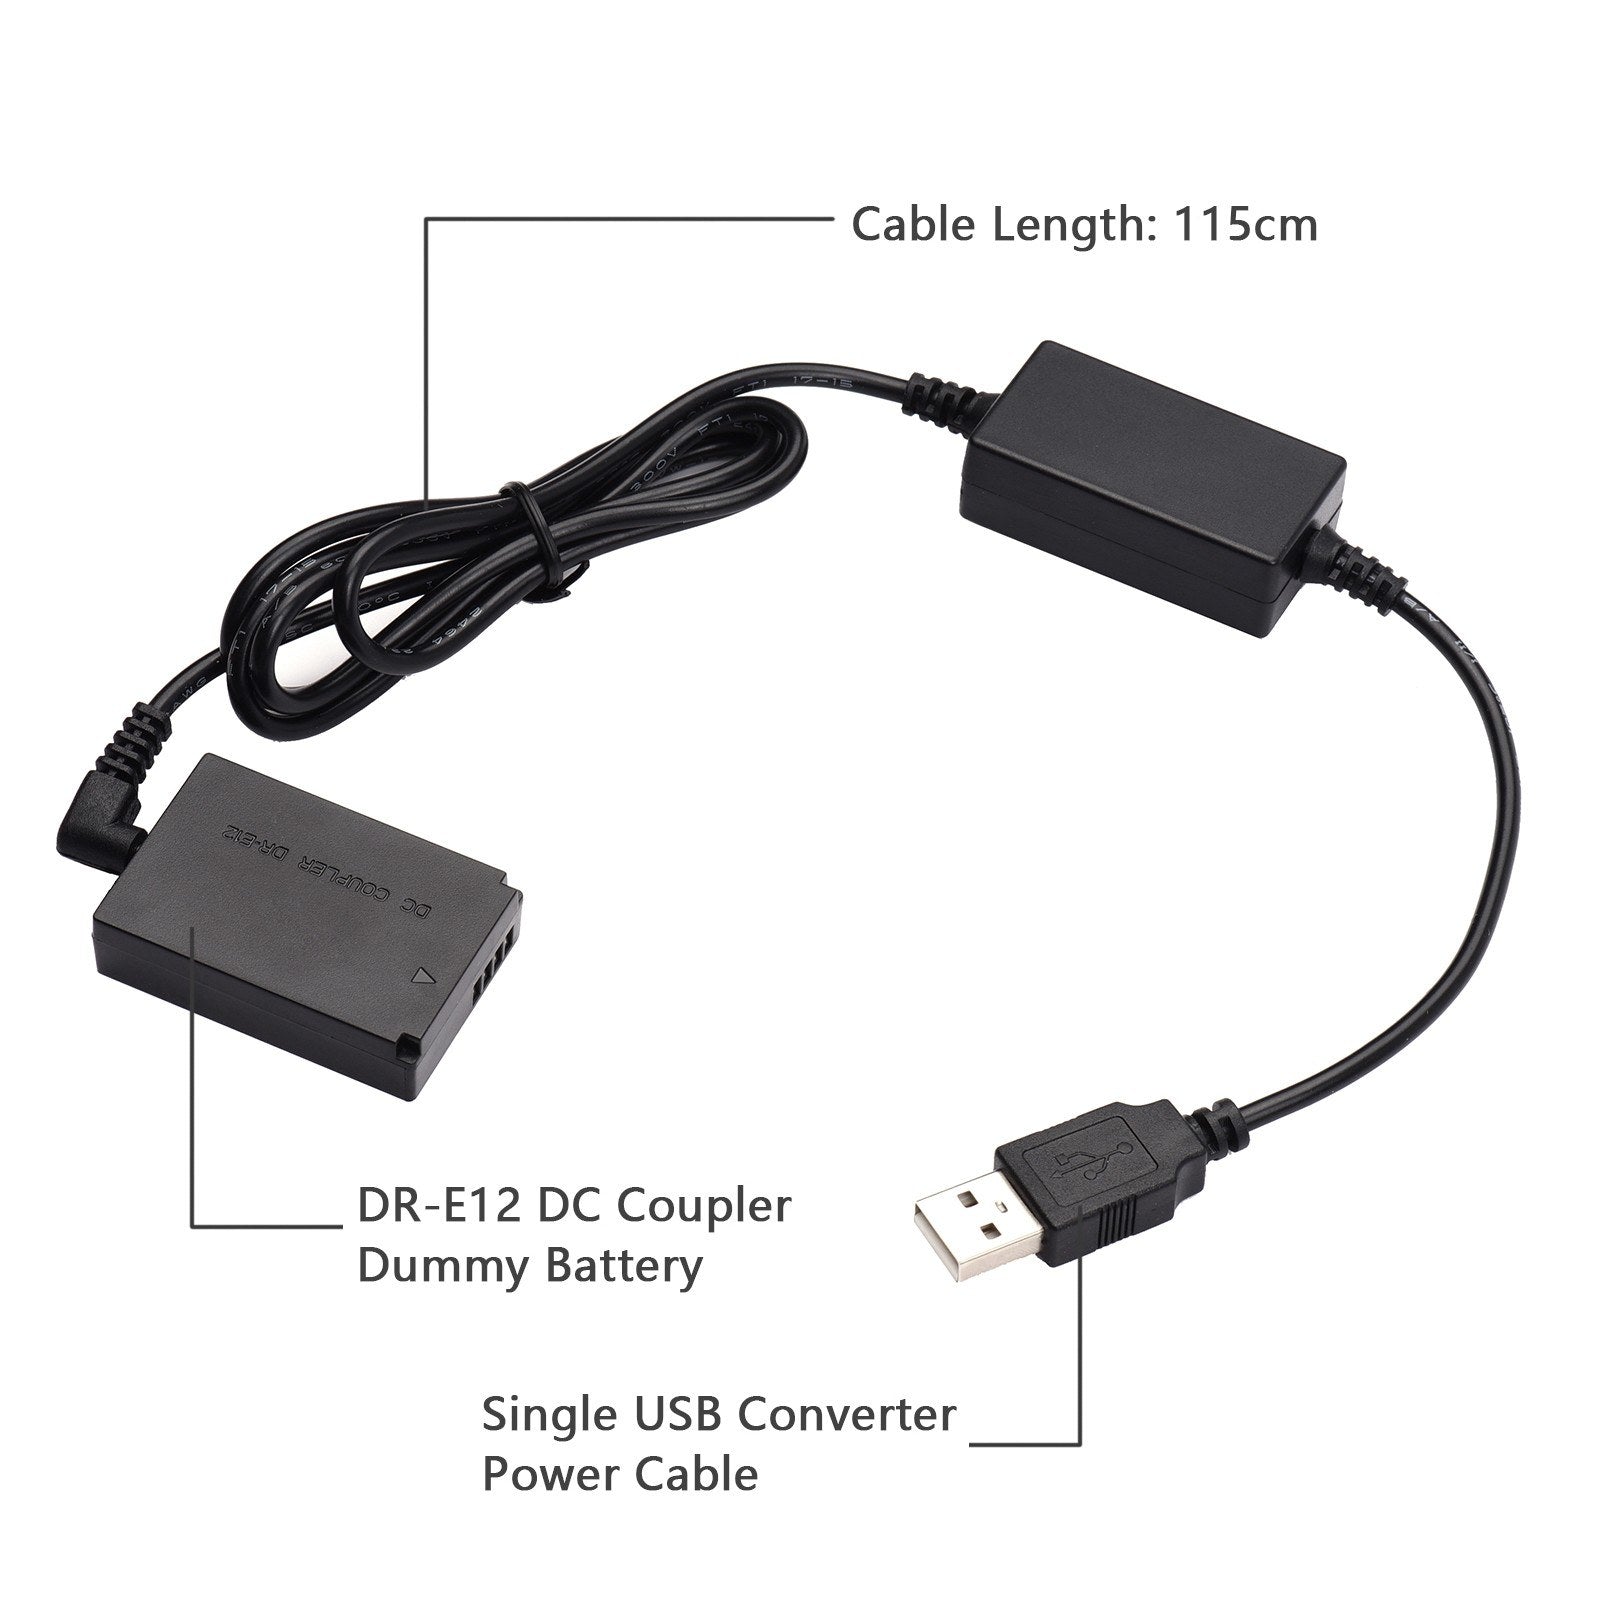 Andoer DR-E12 USB Power Kit DC Coupler with USB DC Converter Power Cable Compatible with Canon EOS M M2 M10 M50 M100 M200 Cameras